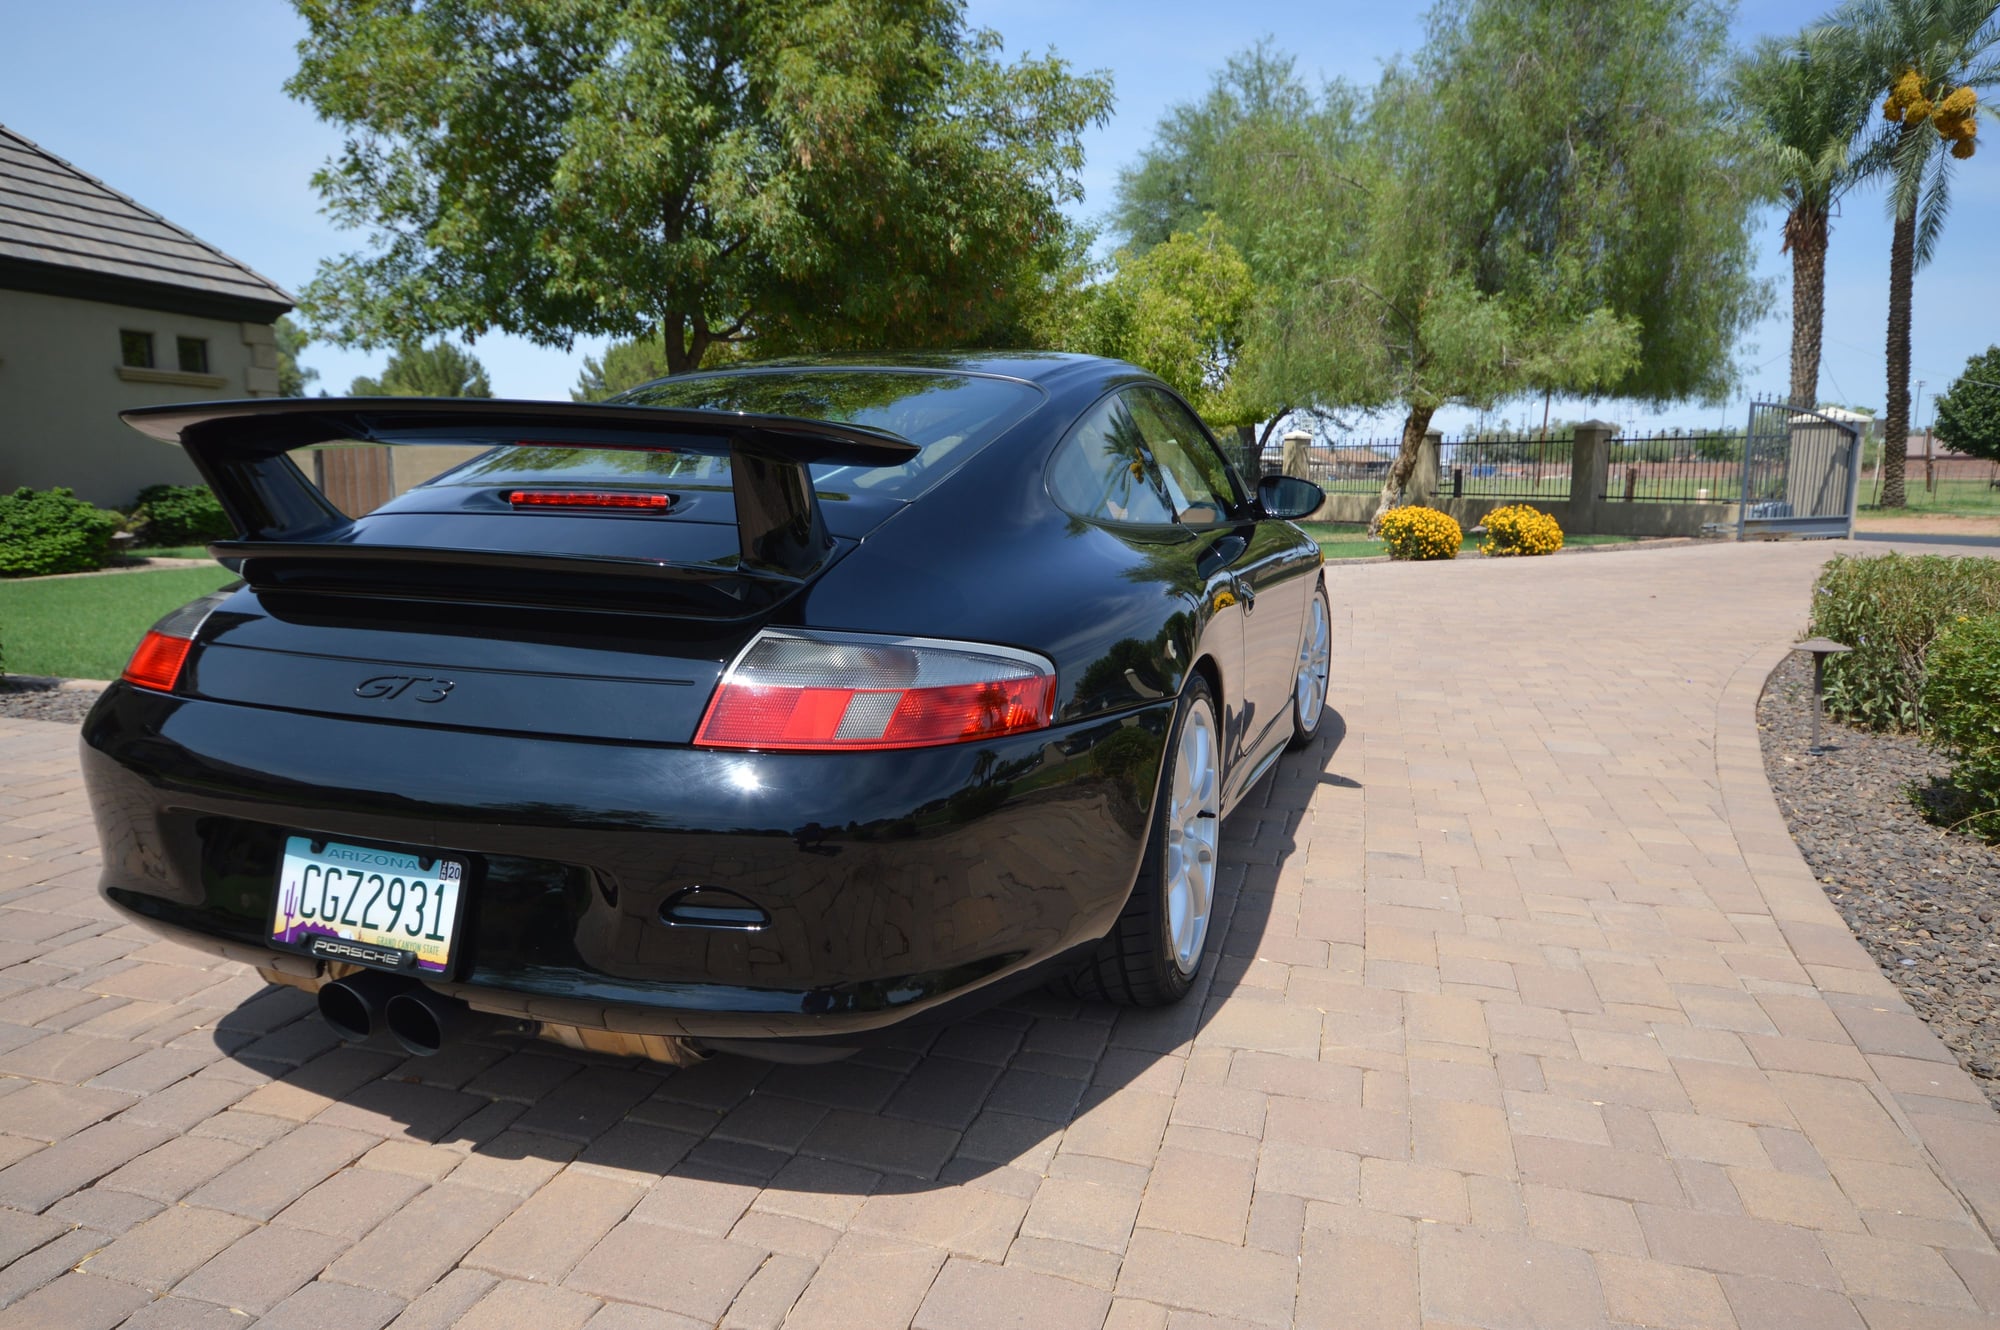 2004 Porsche GT3 - 2004 GT3 - Used - VIN wp0c29994s692391 - 57,950 Miles - 6 cyl - 2WD - Manual - Coupe - Black - Gilbert, AZ 85296, United States